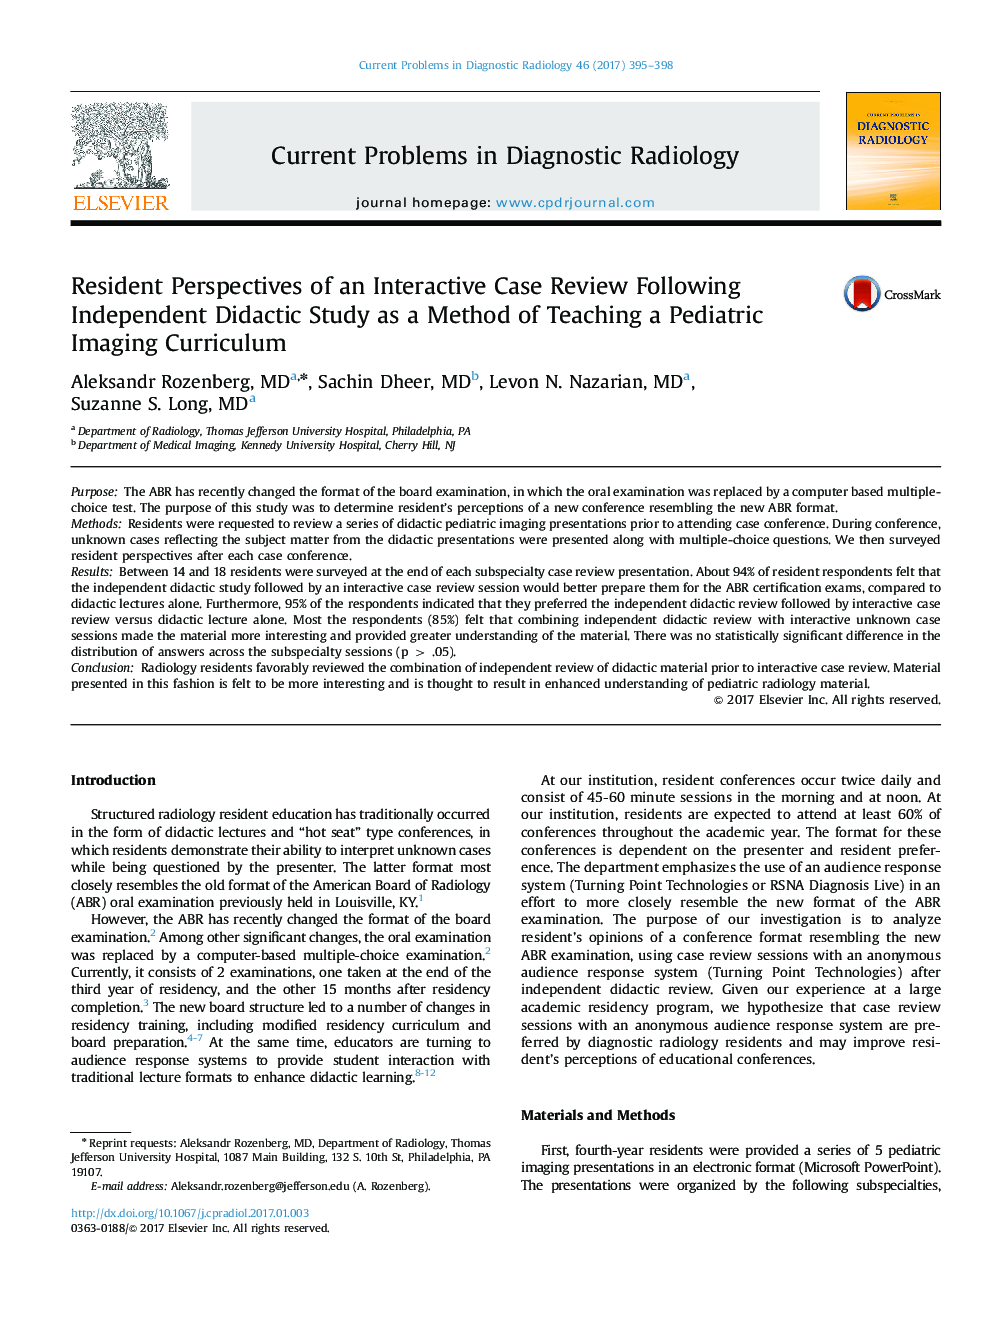 Resident Perspectives of an Interactive Case Review Following Independent Didactic Study as a Method of Teaching a Pediatric Imaging Curriculum